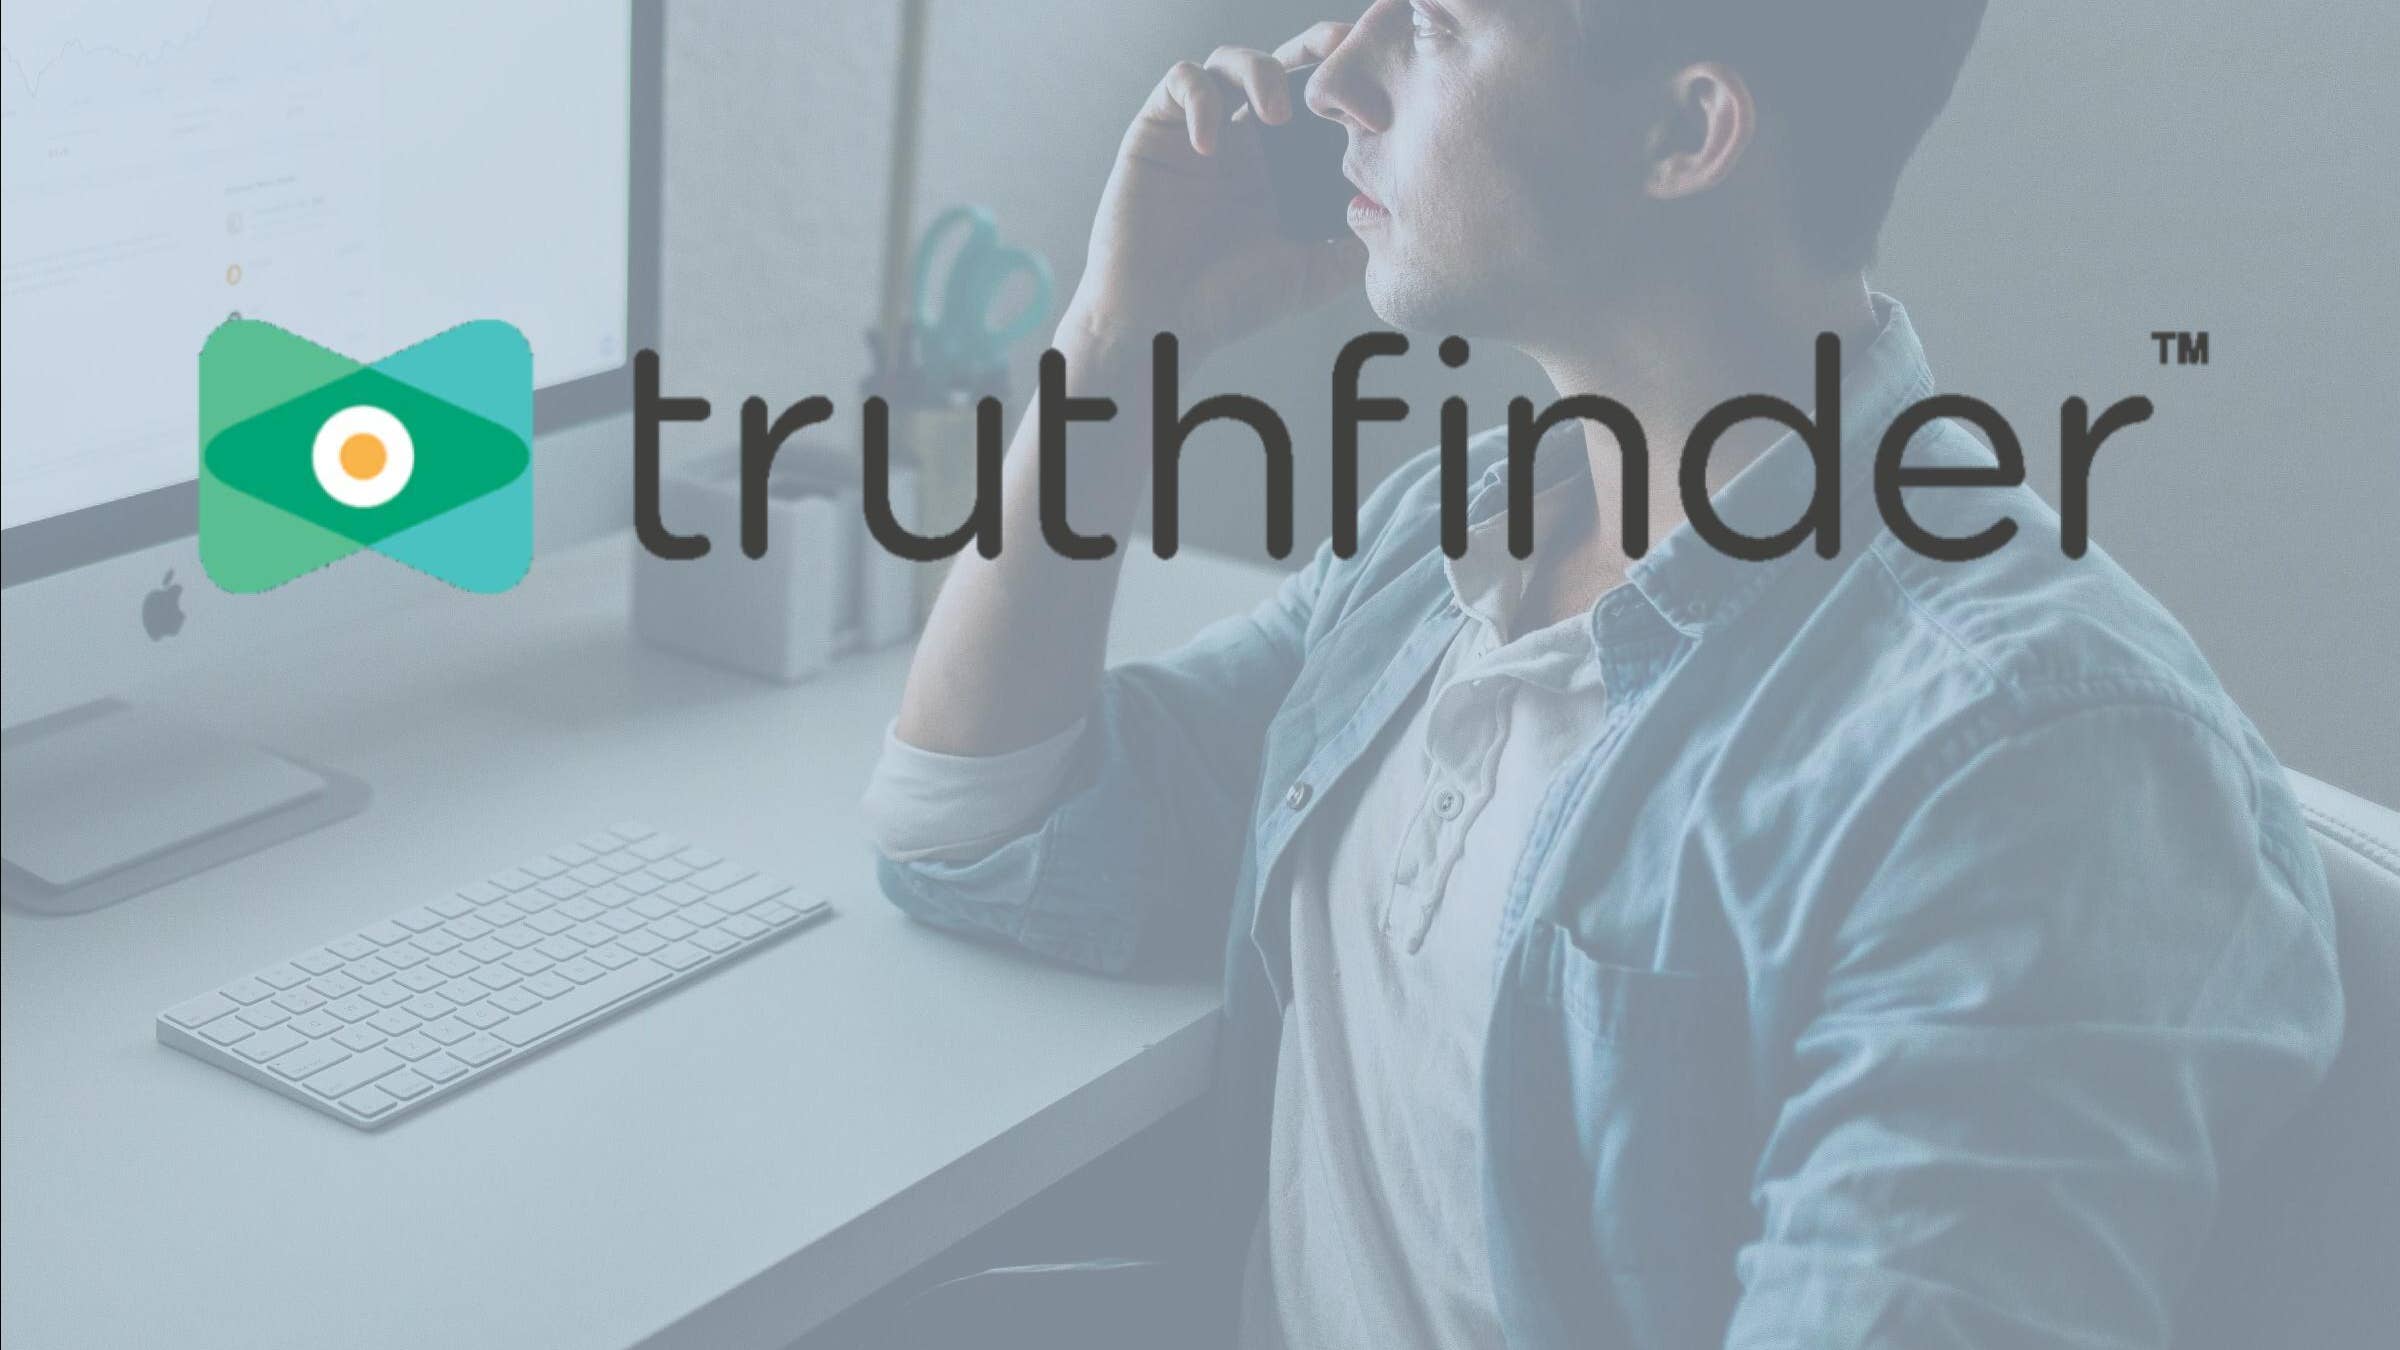 Is truthfinder free and legit?